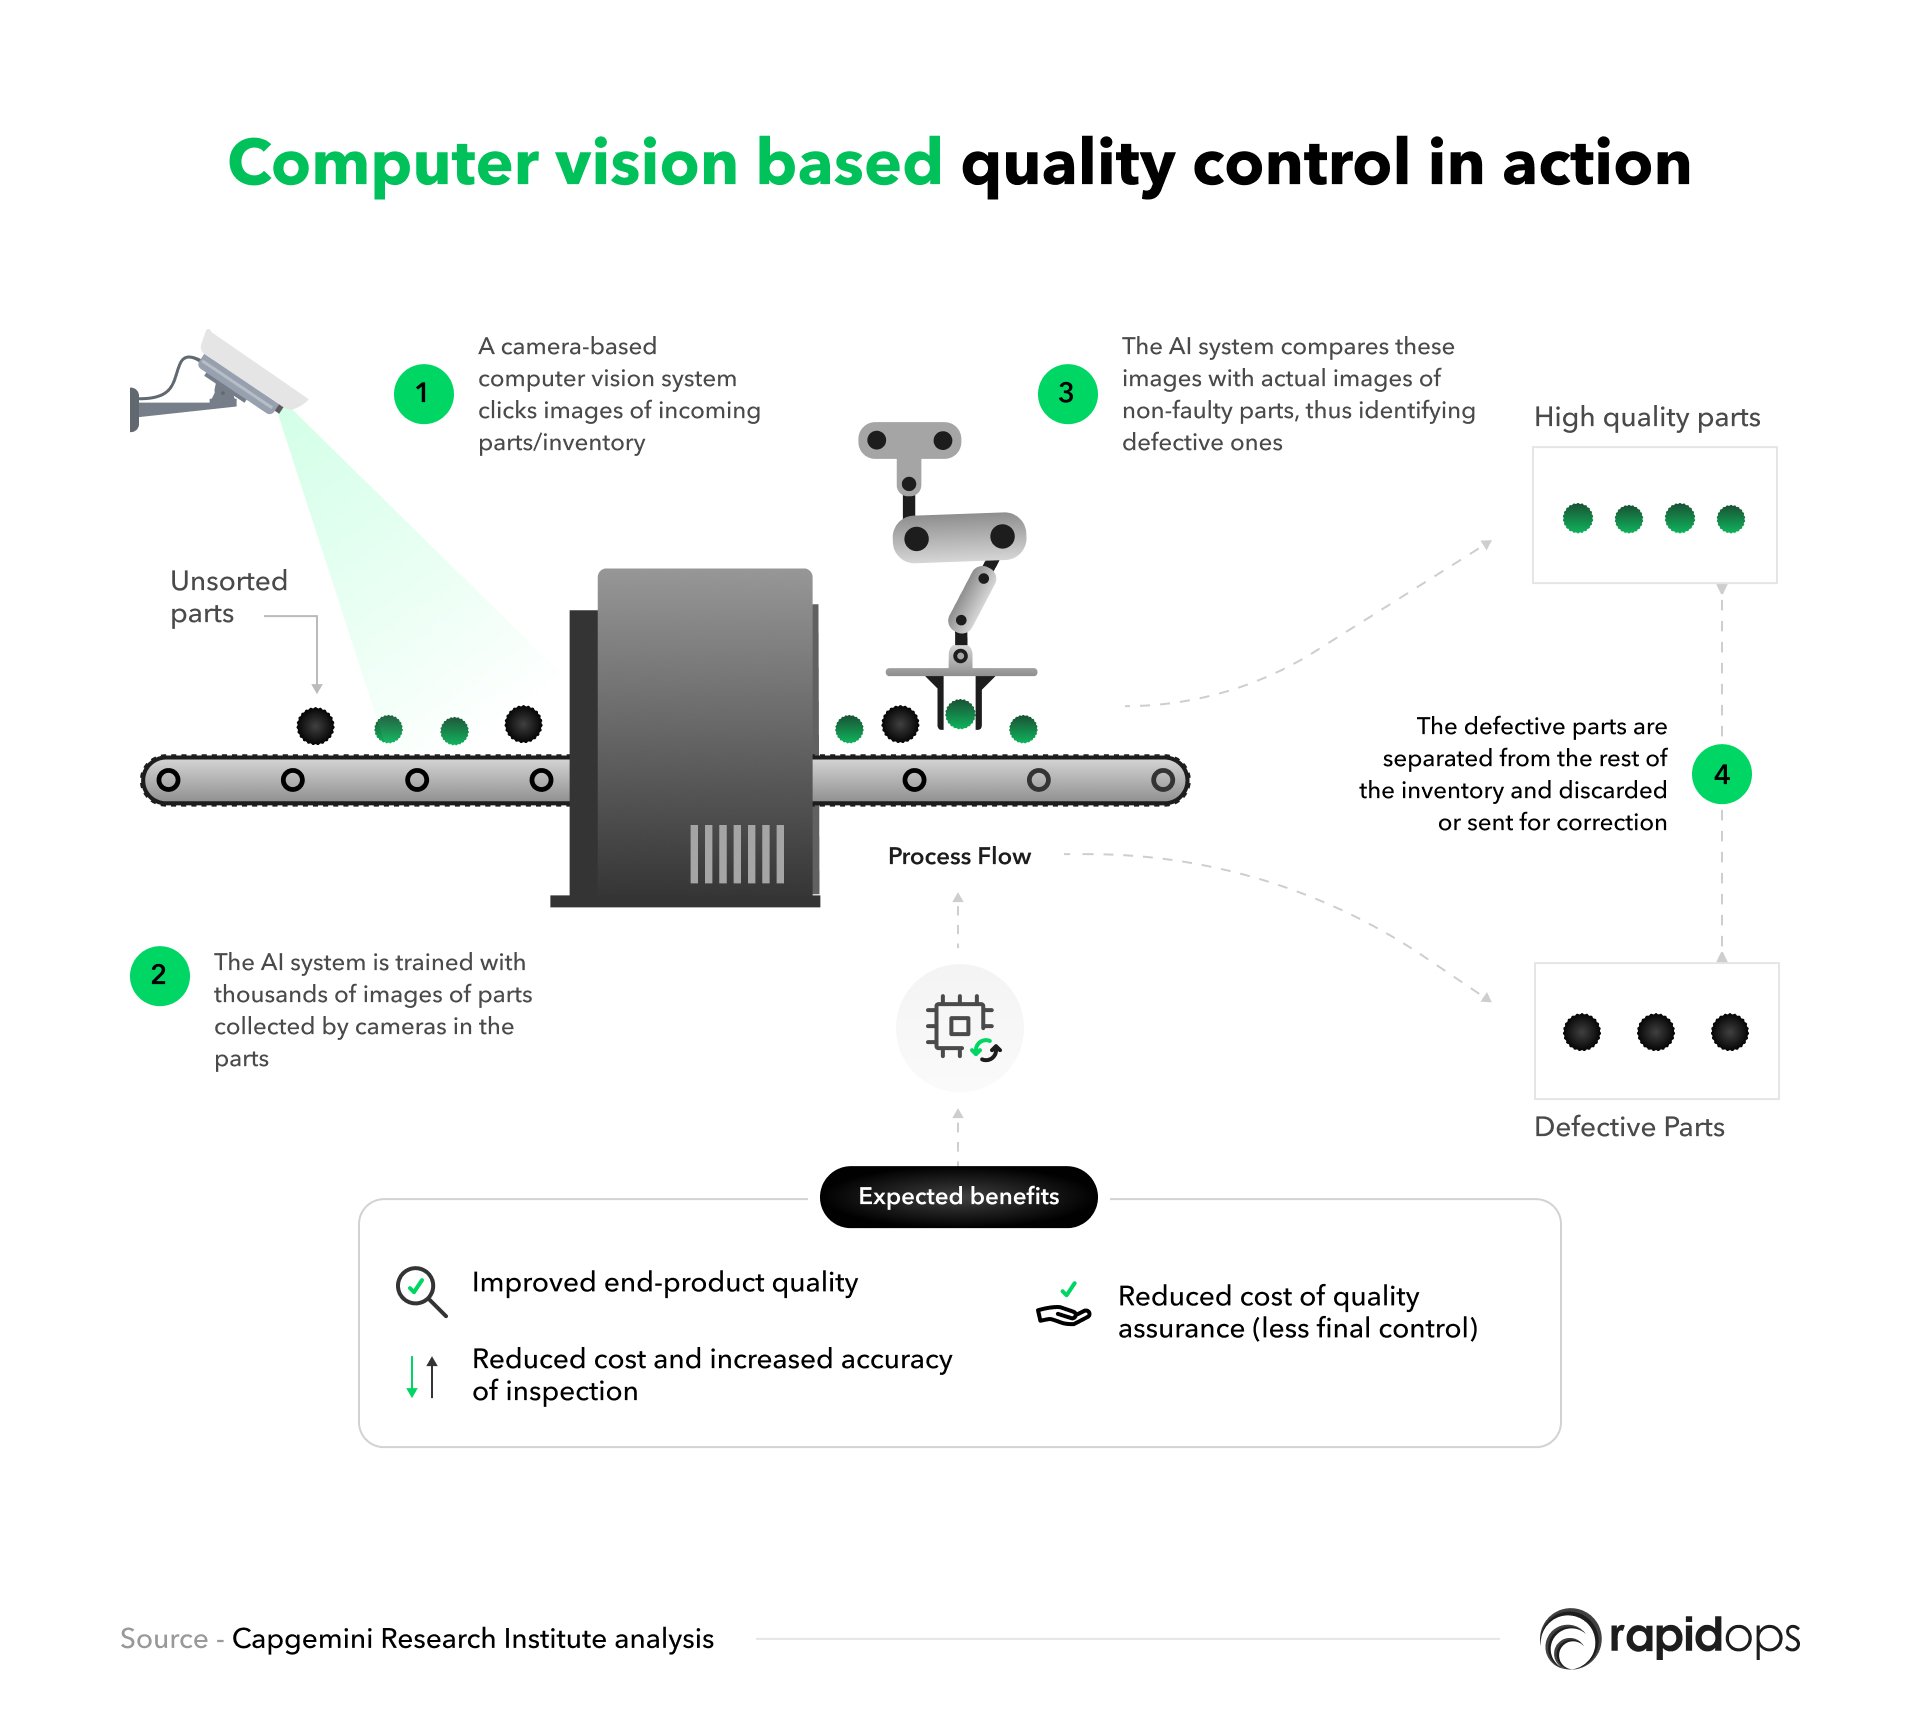 Computer vision based quality control